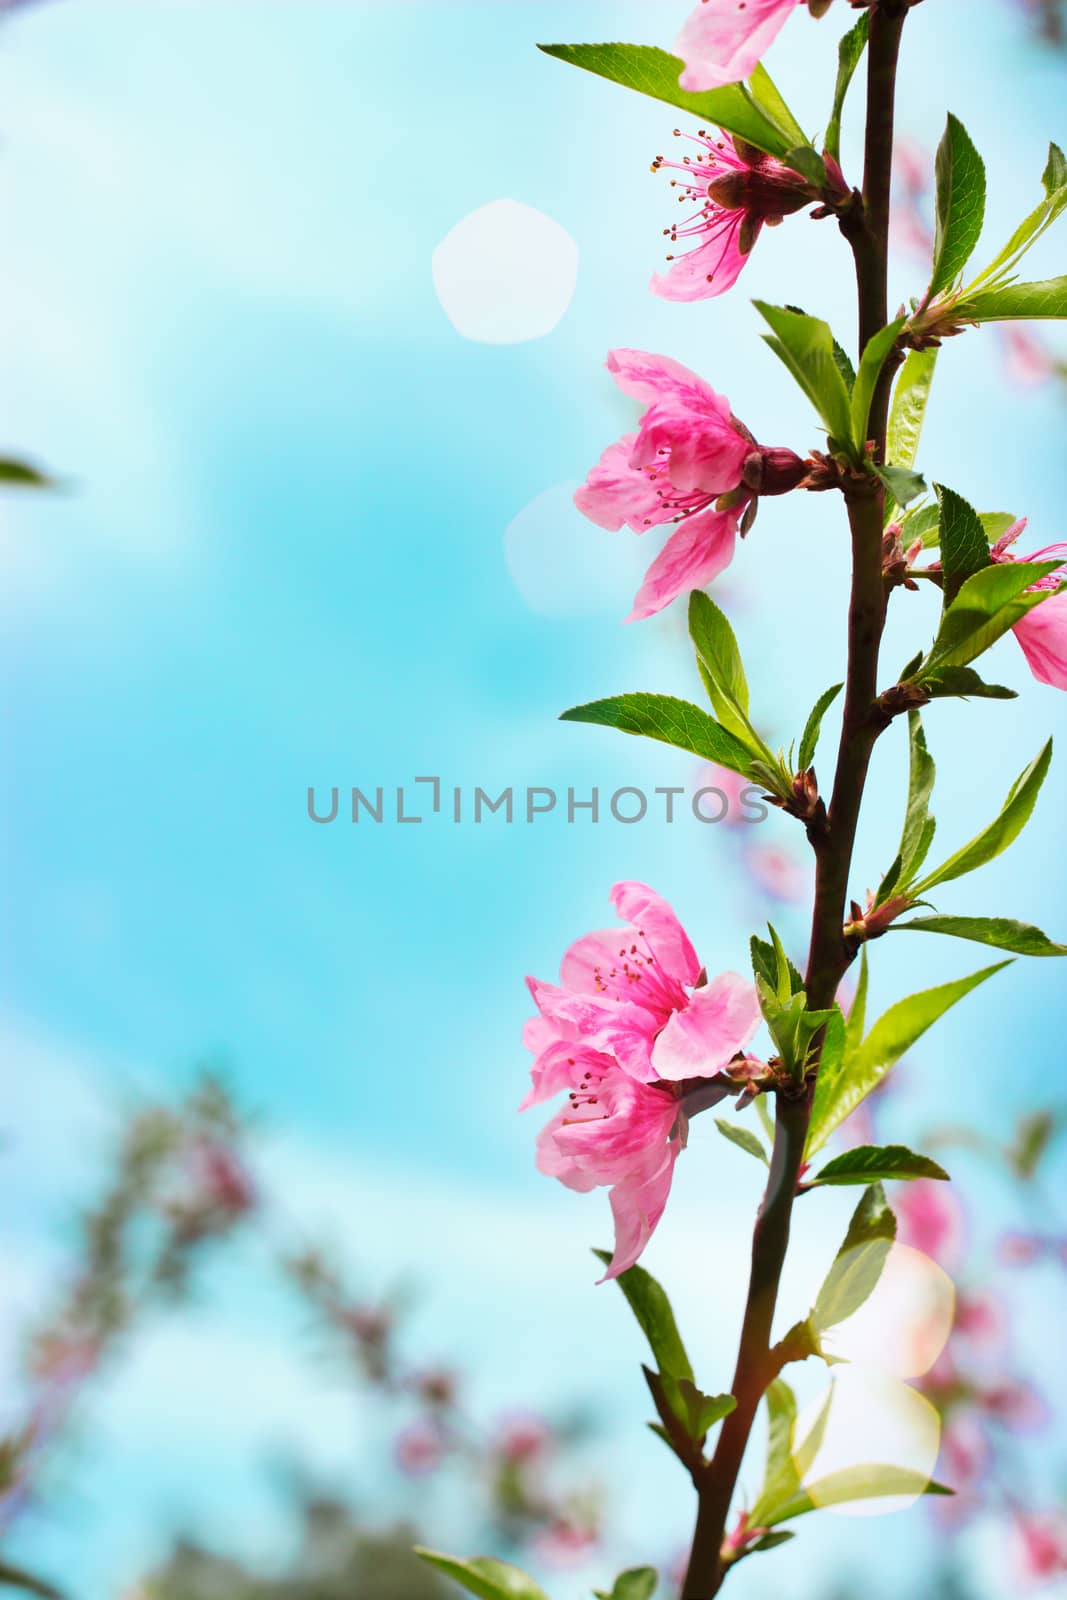 Beautiful fresh pink flowers and green leaves against blue sky as background